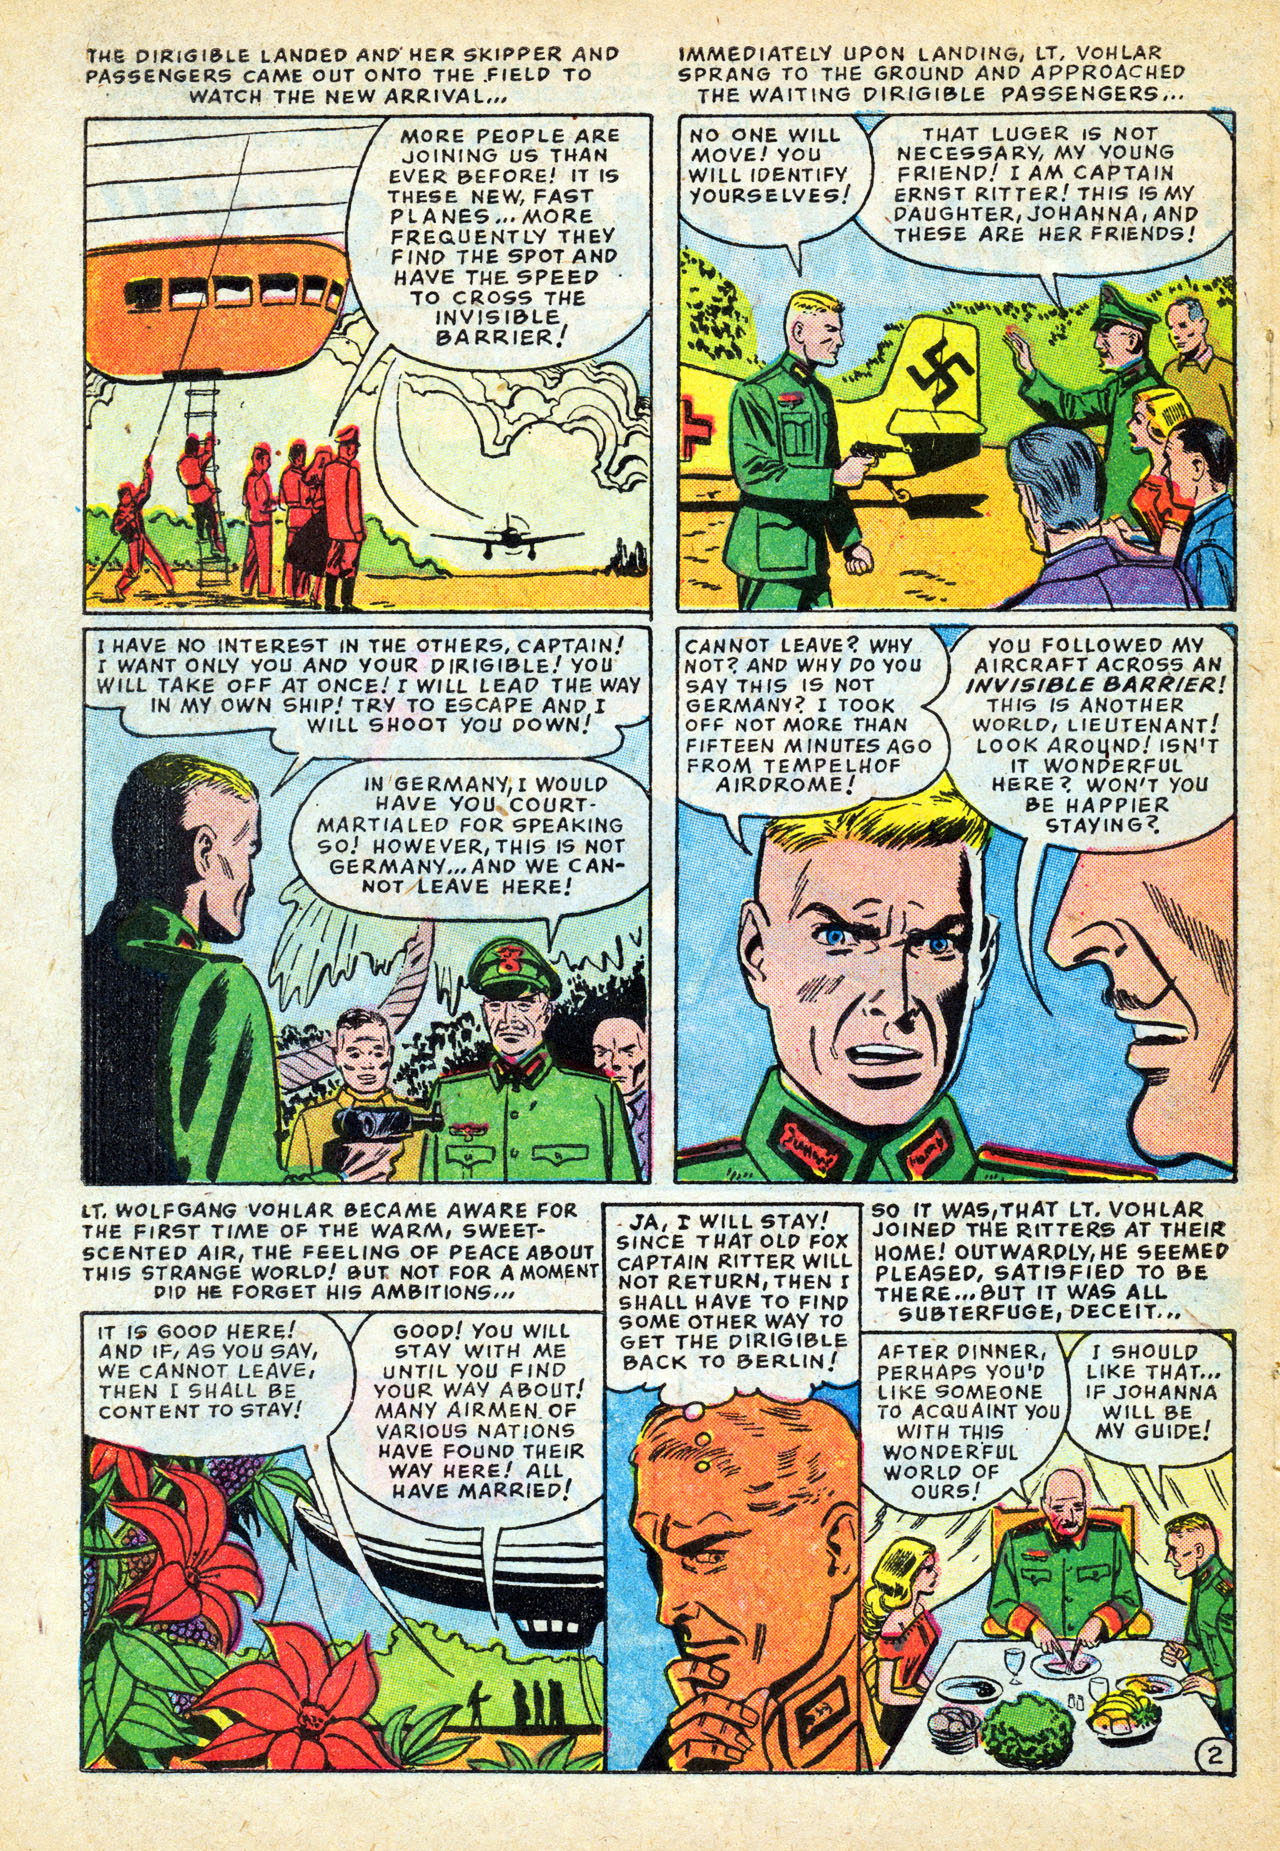 Marvel Tales (1949) 151 Page 13